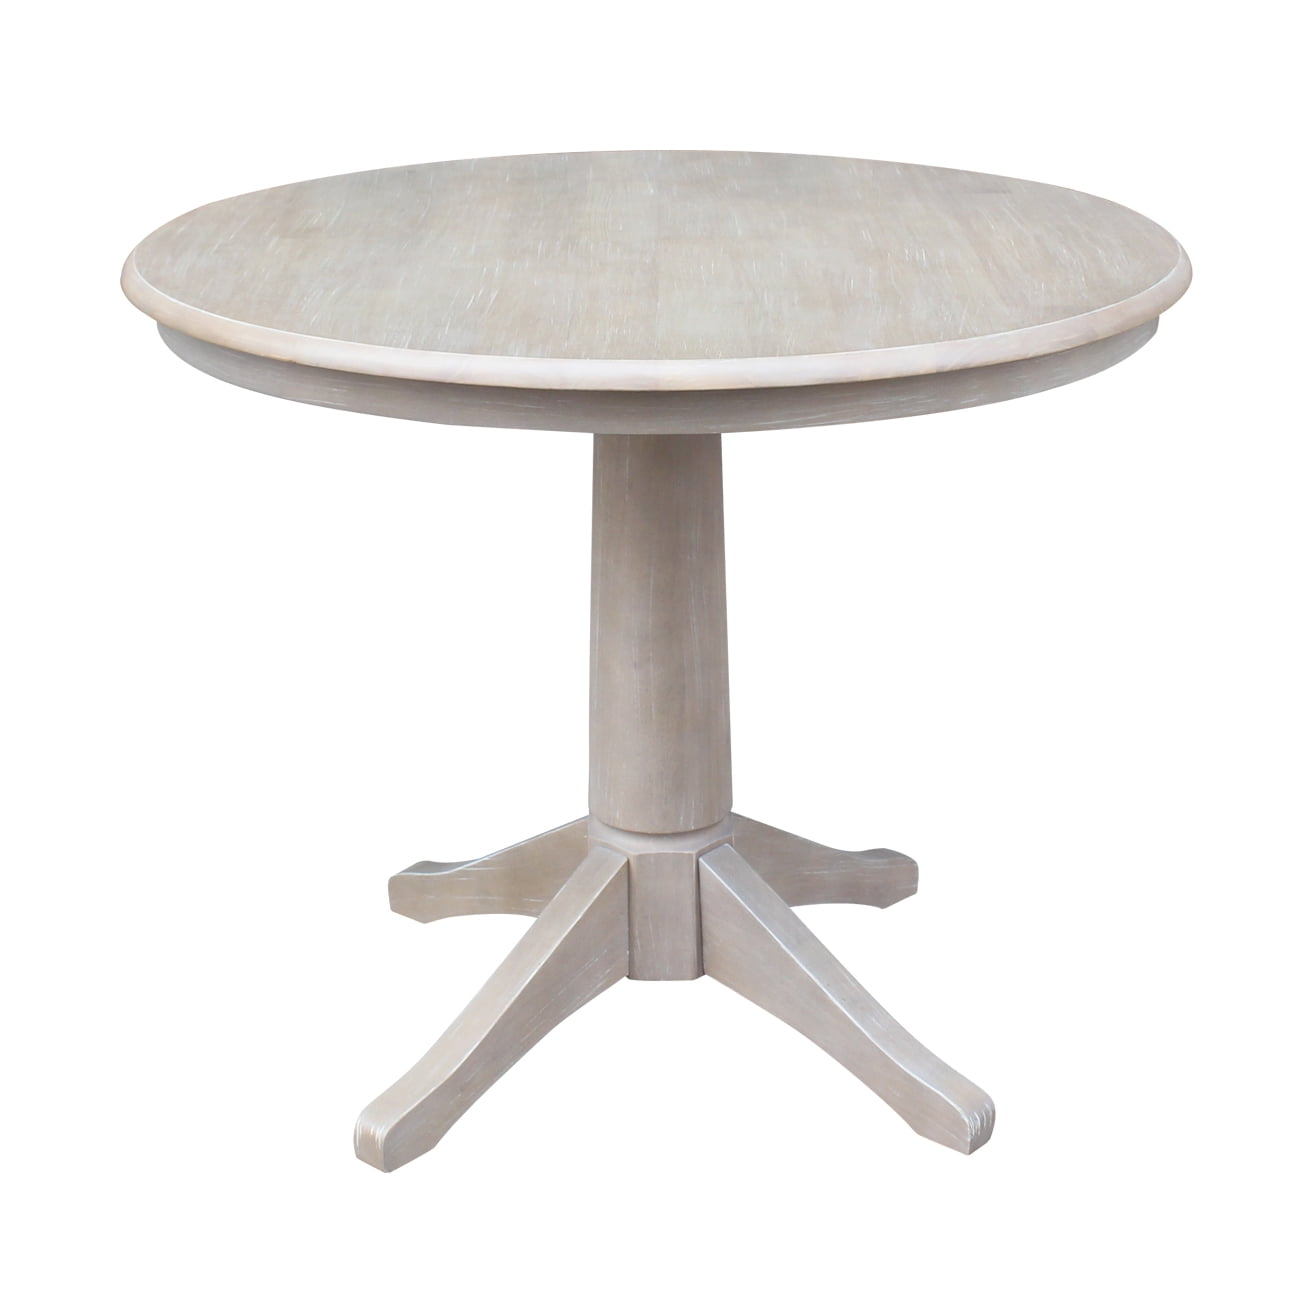 Round Top 36" x 36" Solid Wood Pedestal Dining Table in Washed Gray